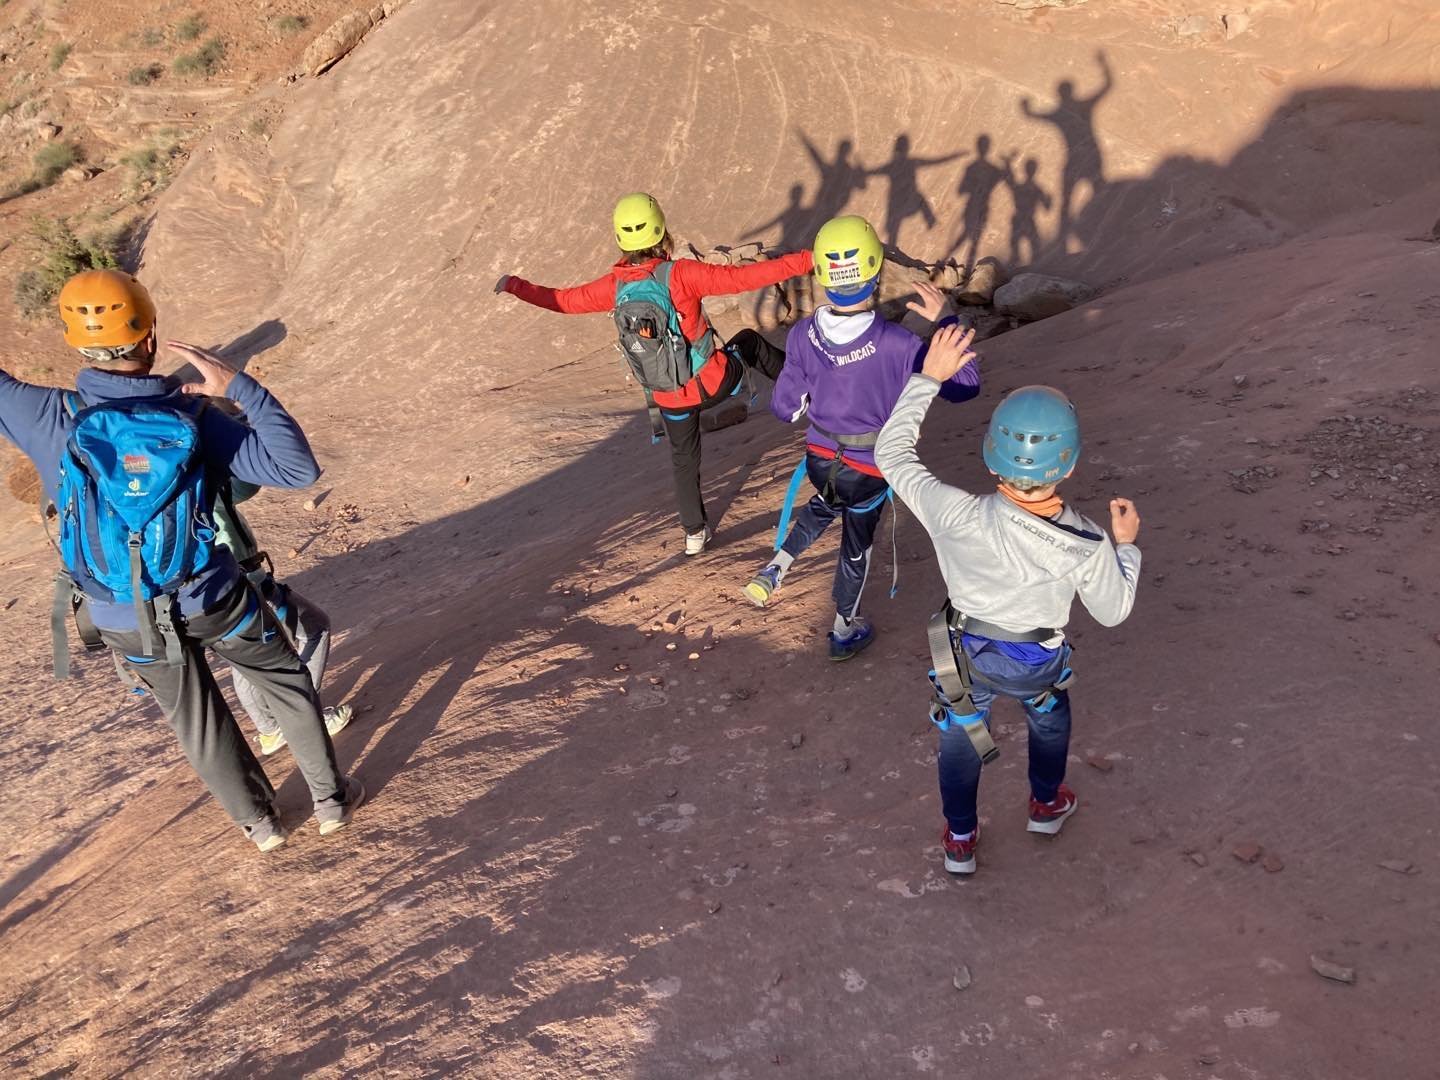 Early morning risers get to play with their shadows. #moabcanyoneering #supportlocal #funinthesun #familyvacation2024 #windgateadventures #moab